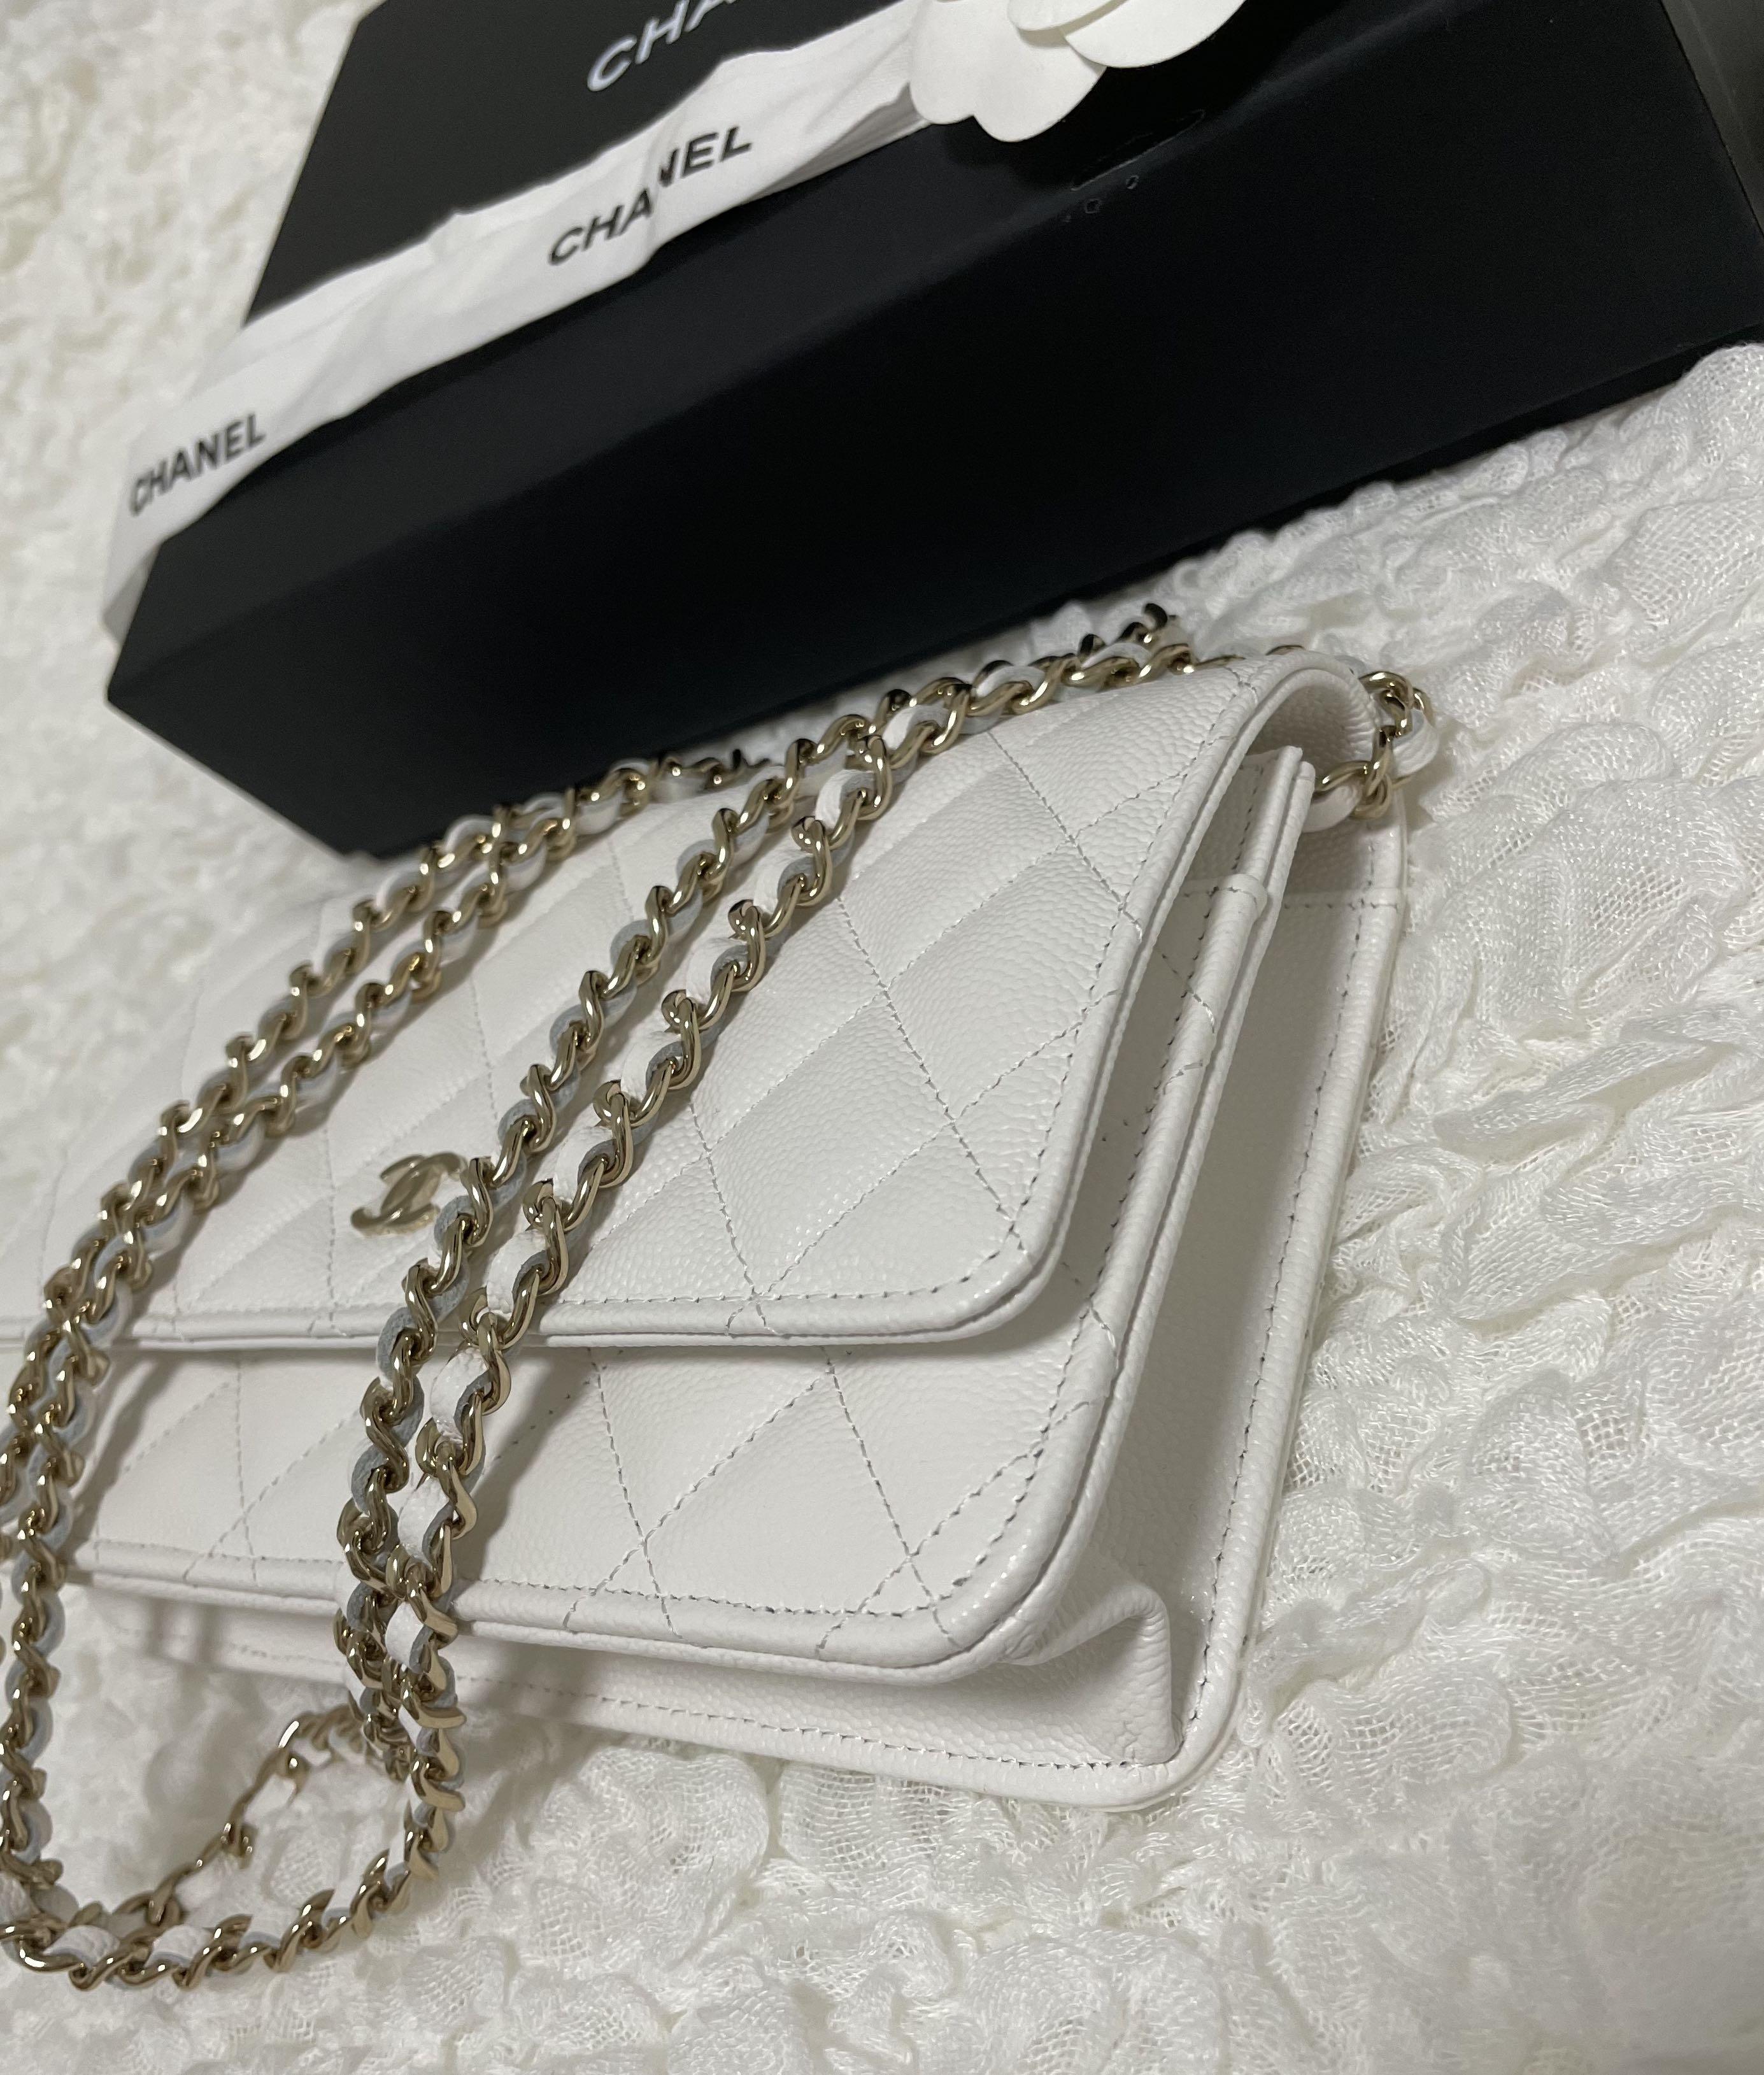 Chanel Wallet on Chain, 22P Light Blue Caviar Leather, Gold Hardware, New  in Box